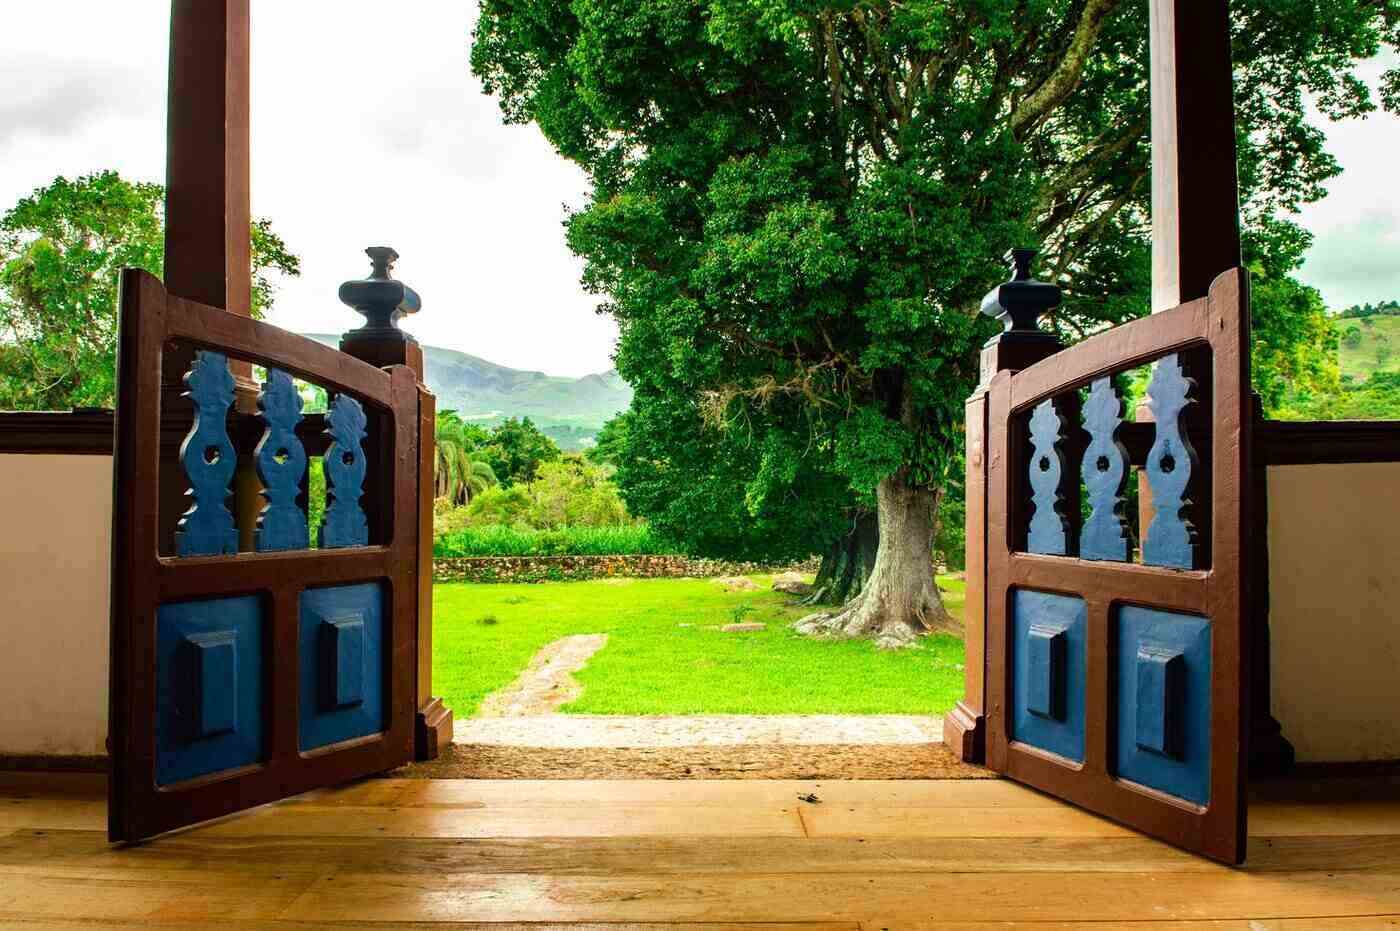 open gate from porch leading to yard - sustainable home design that nourishes body and mind